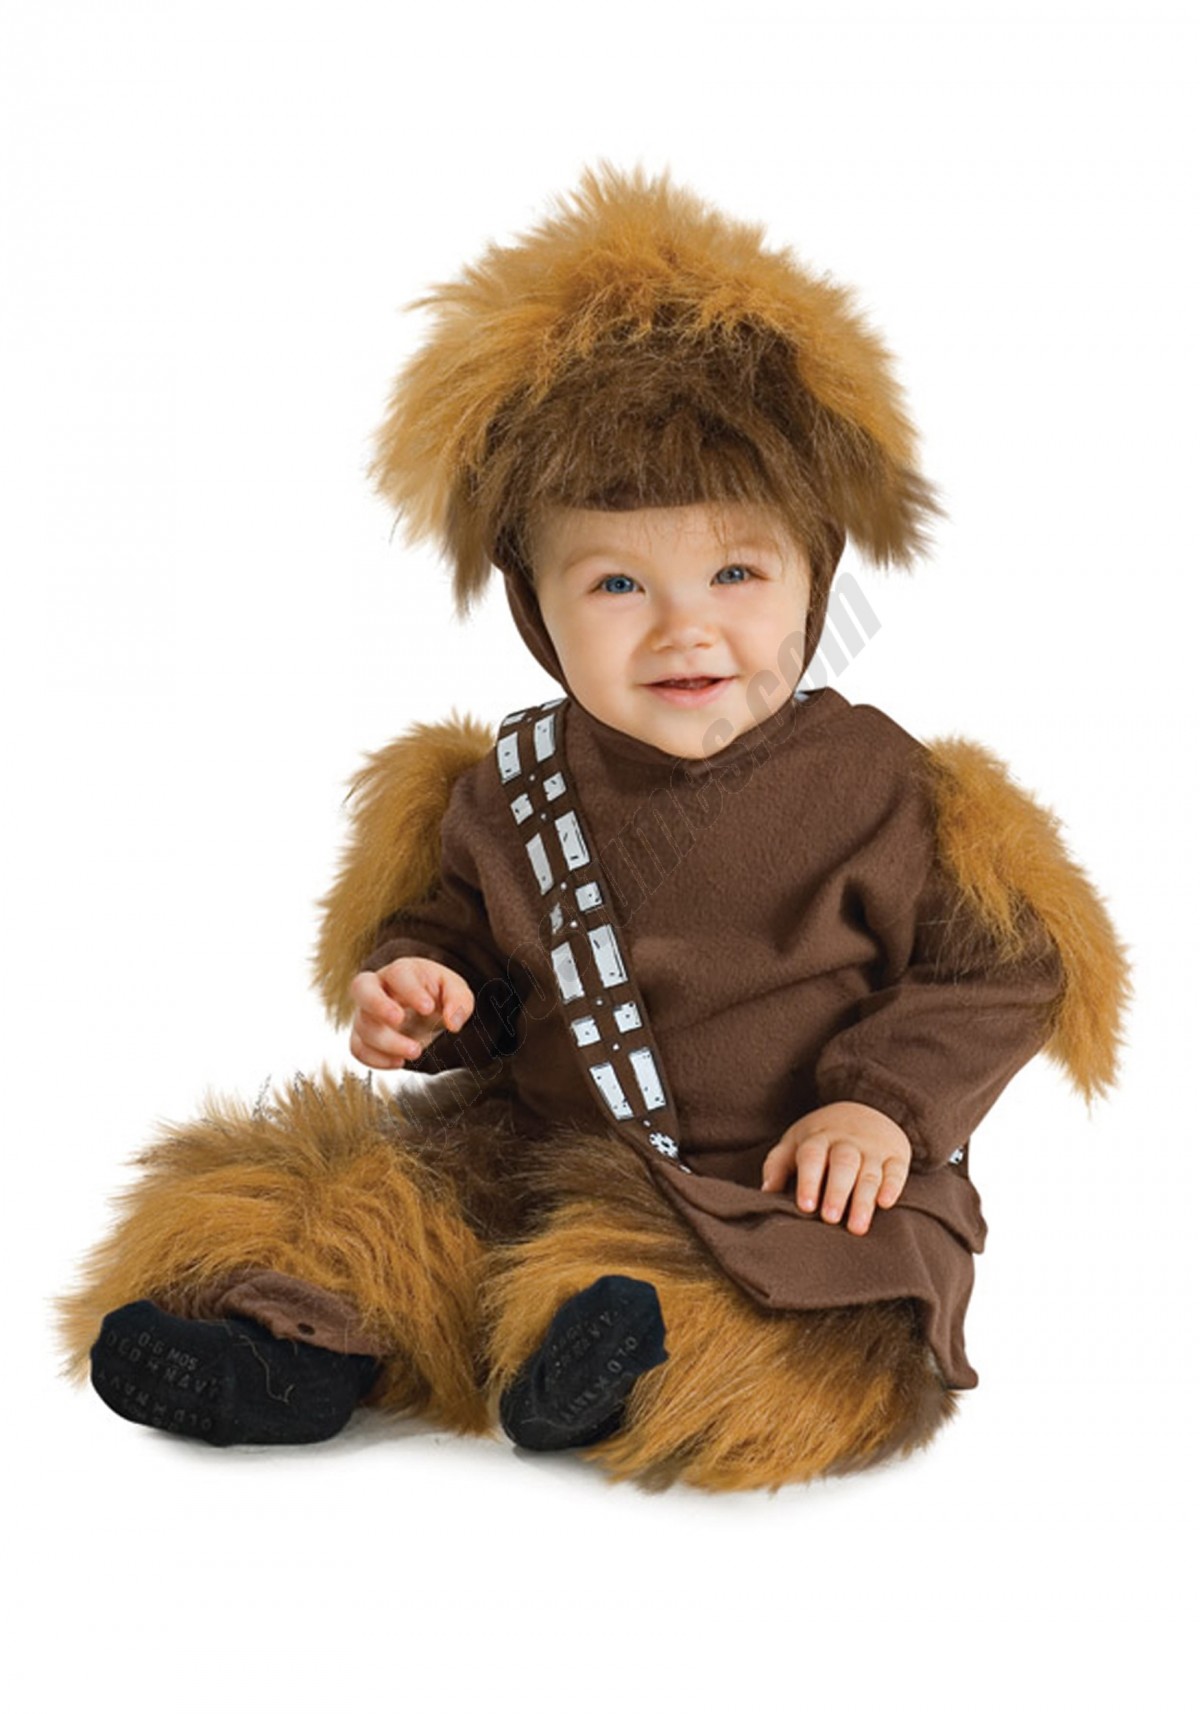 Star Wars Chewbacca Toddler Costume Promotions - -0